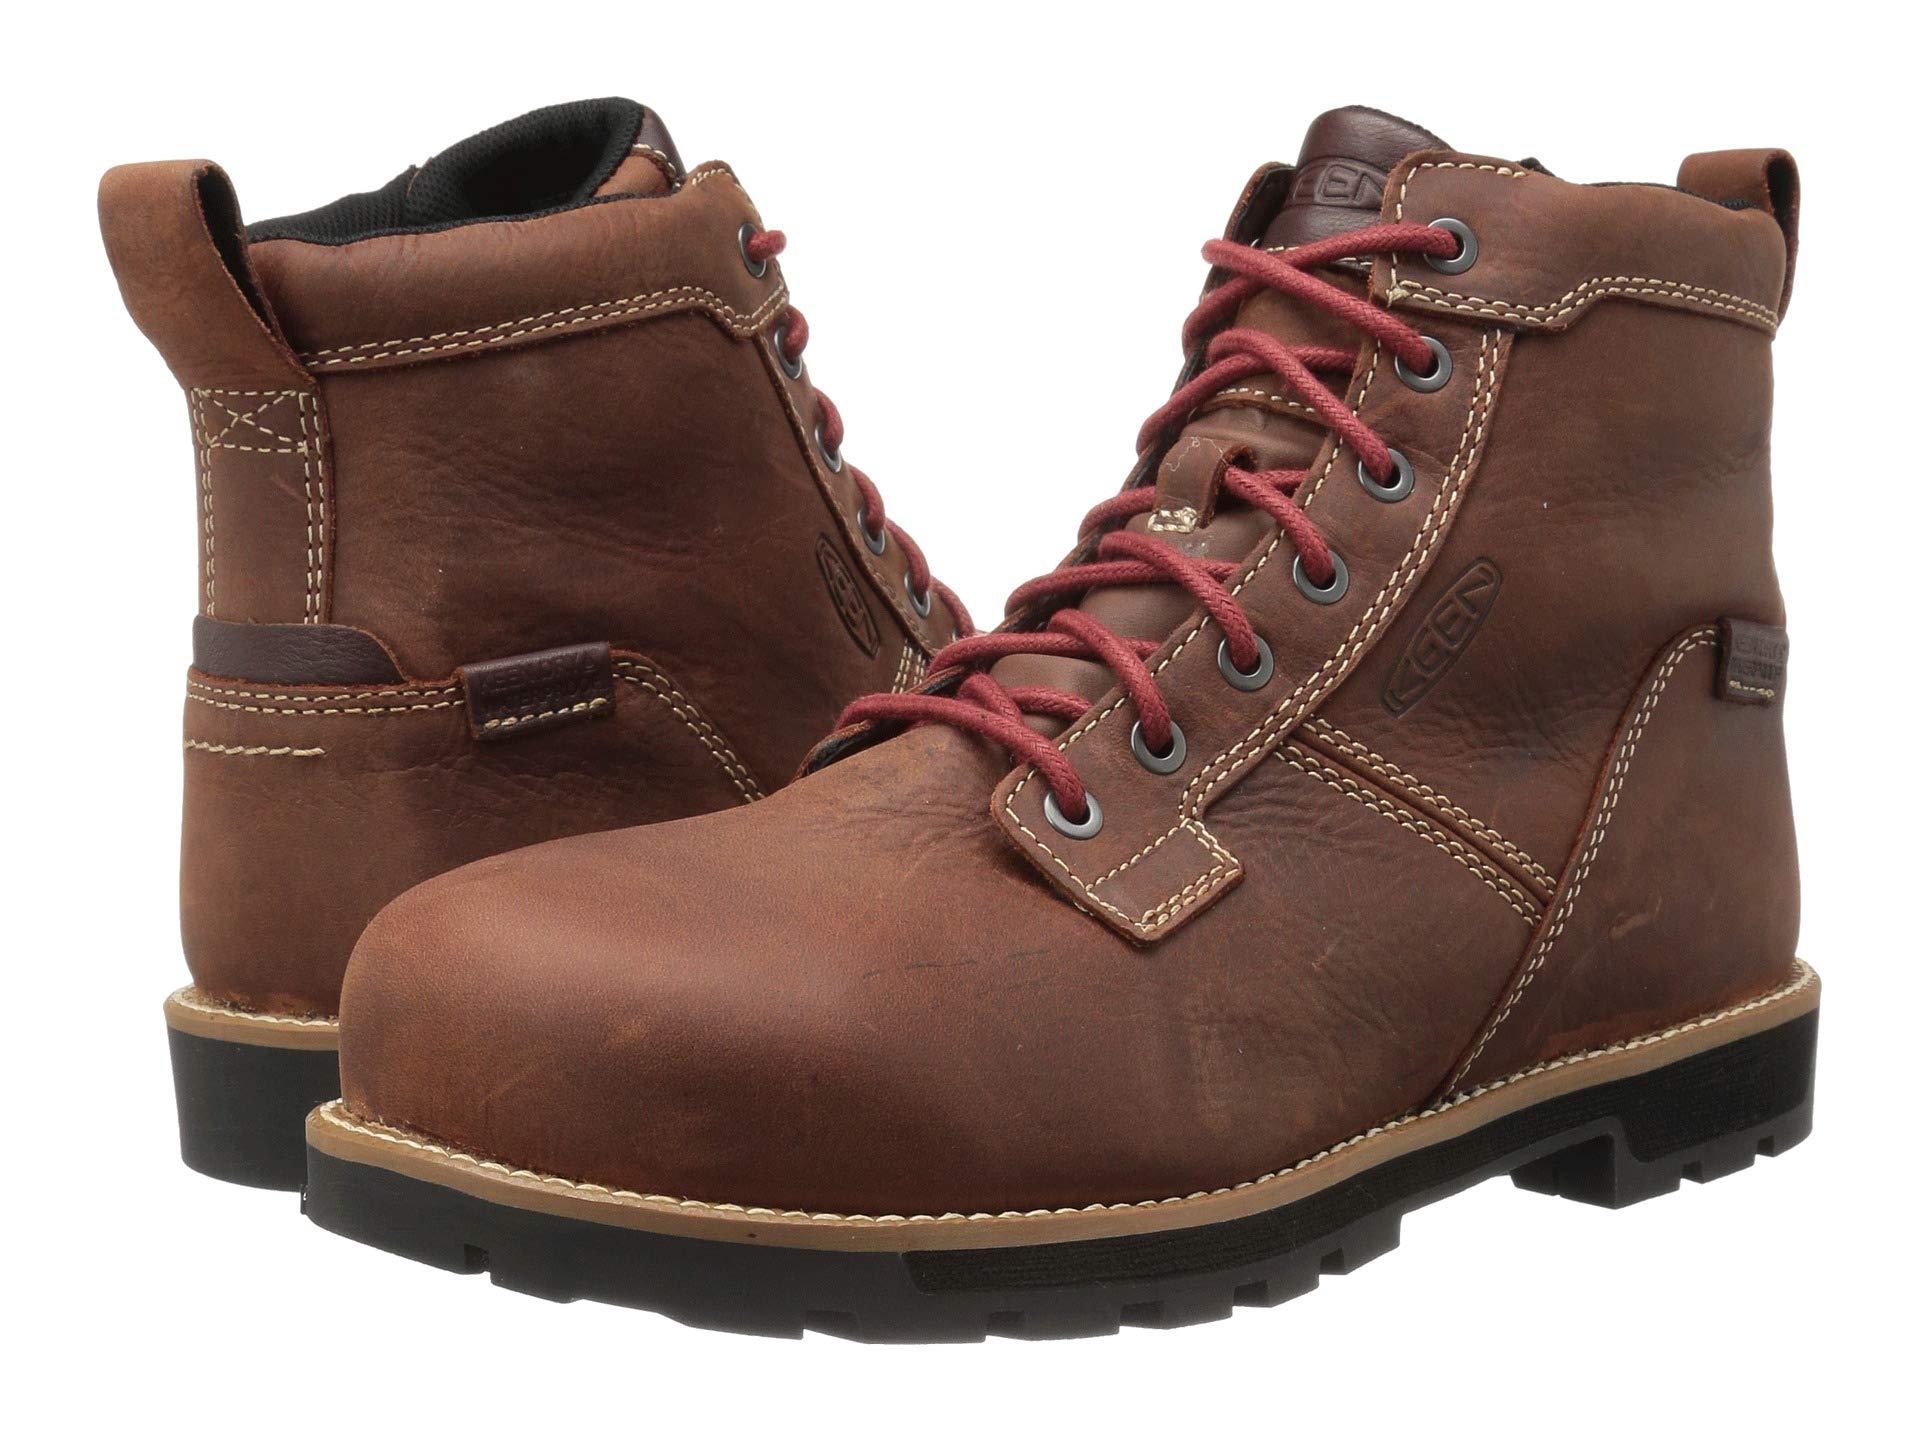 Keen Utility Leather Seattle 6 At Waterproof in Brown for Men - Lyst